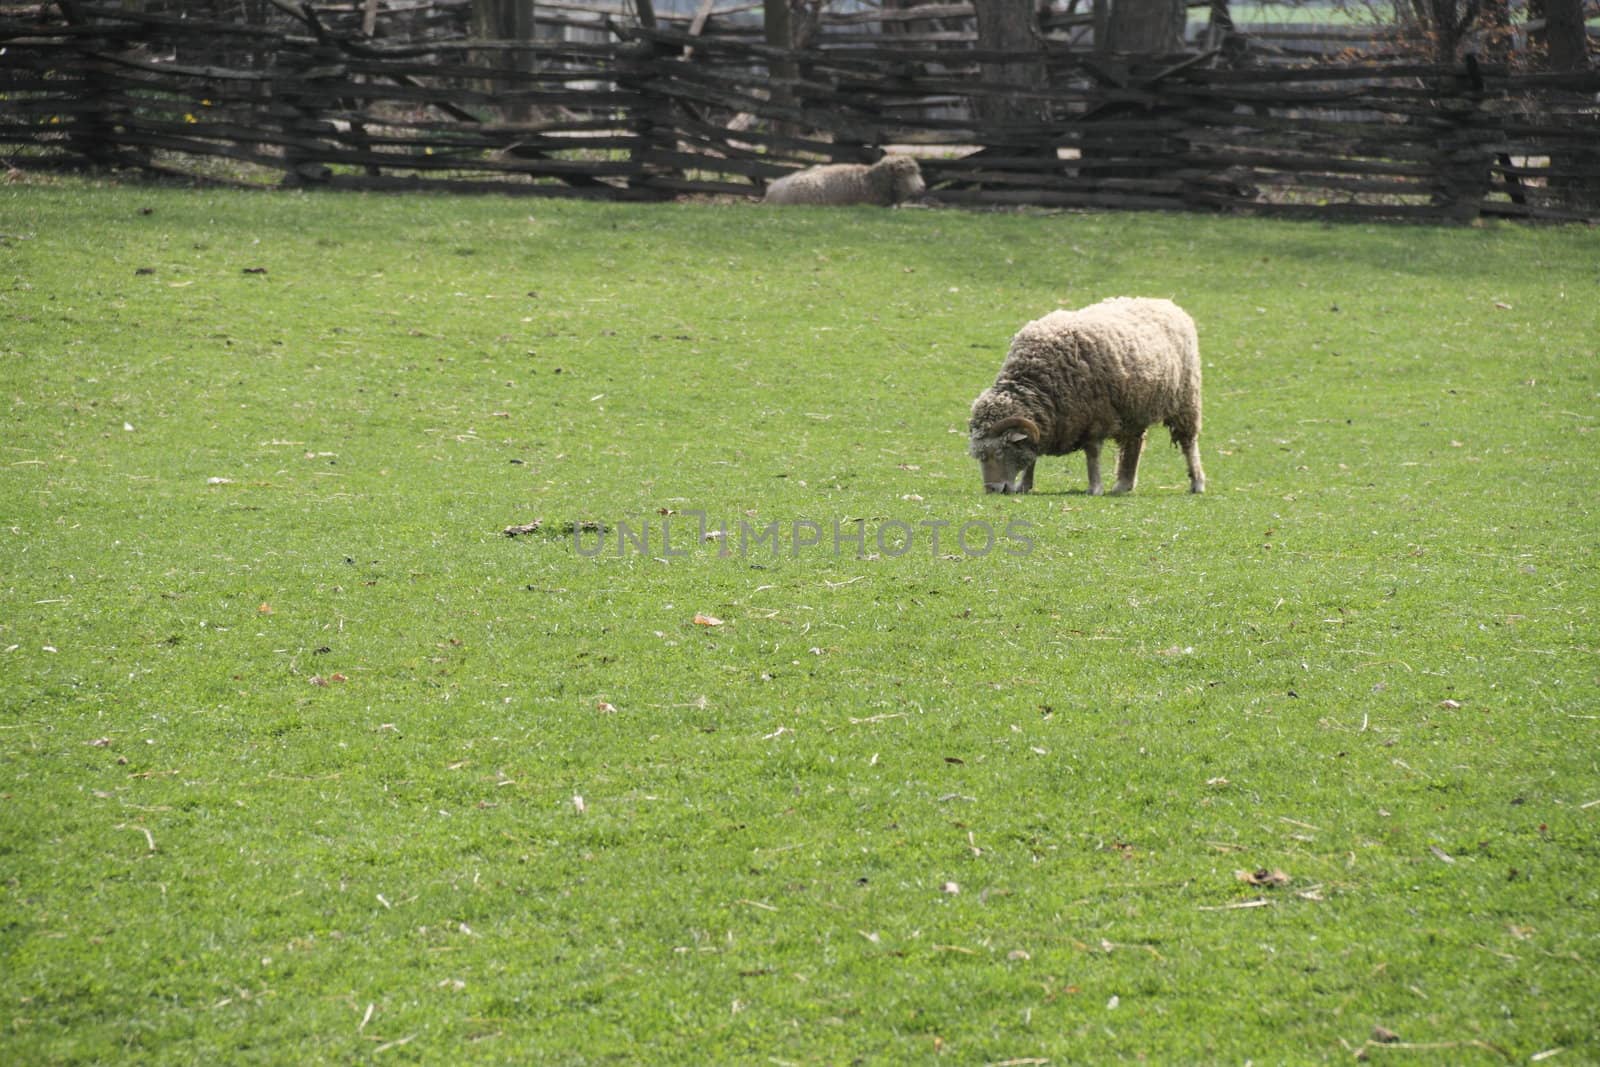 A grazing sheep in a green feild with a fence in the background.